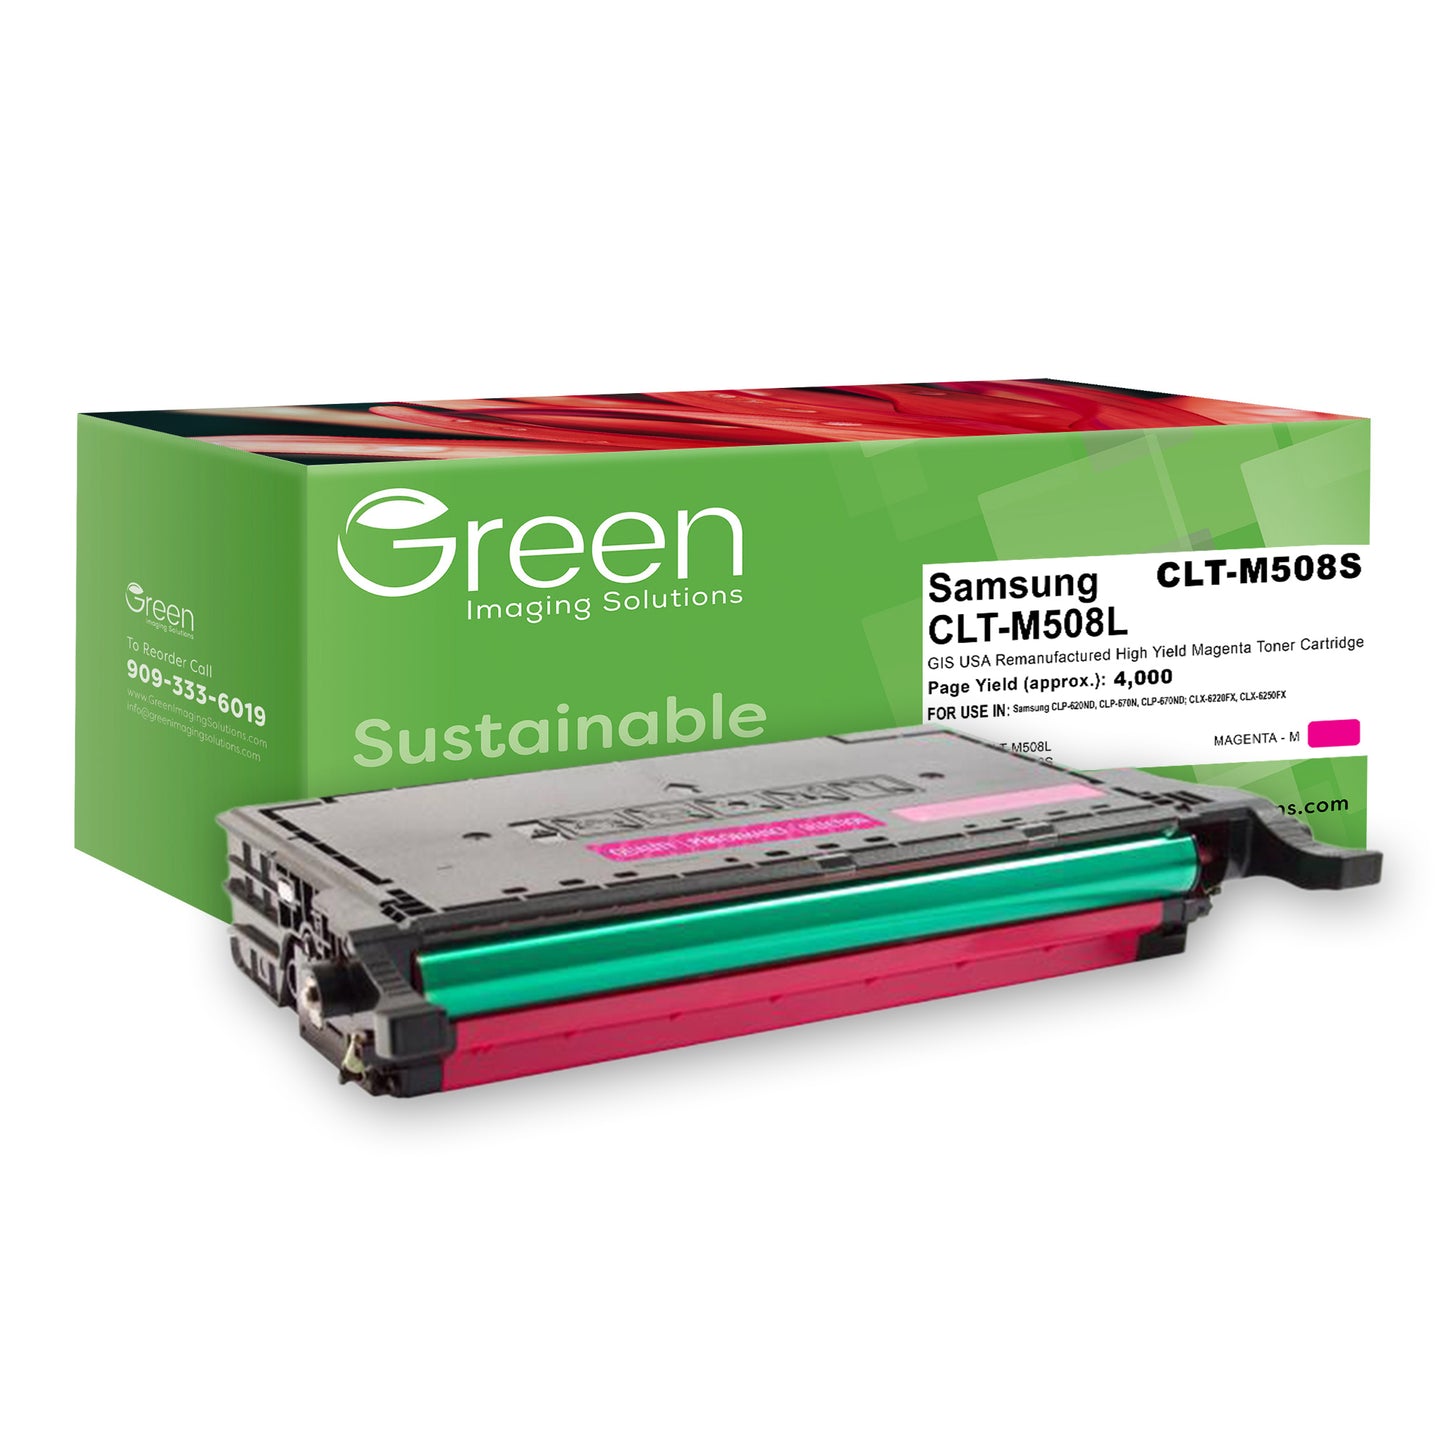 Green Imaging Solutions USA Remanufactured High Yield Magenta Toner Cartridge for Samsung CLT-M508L/CLT-M508S